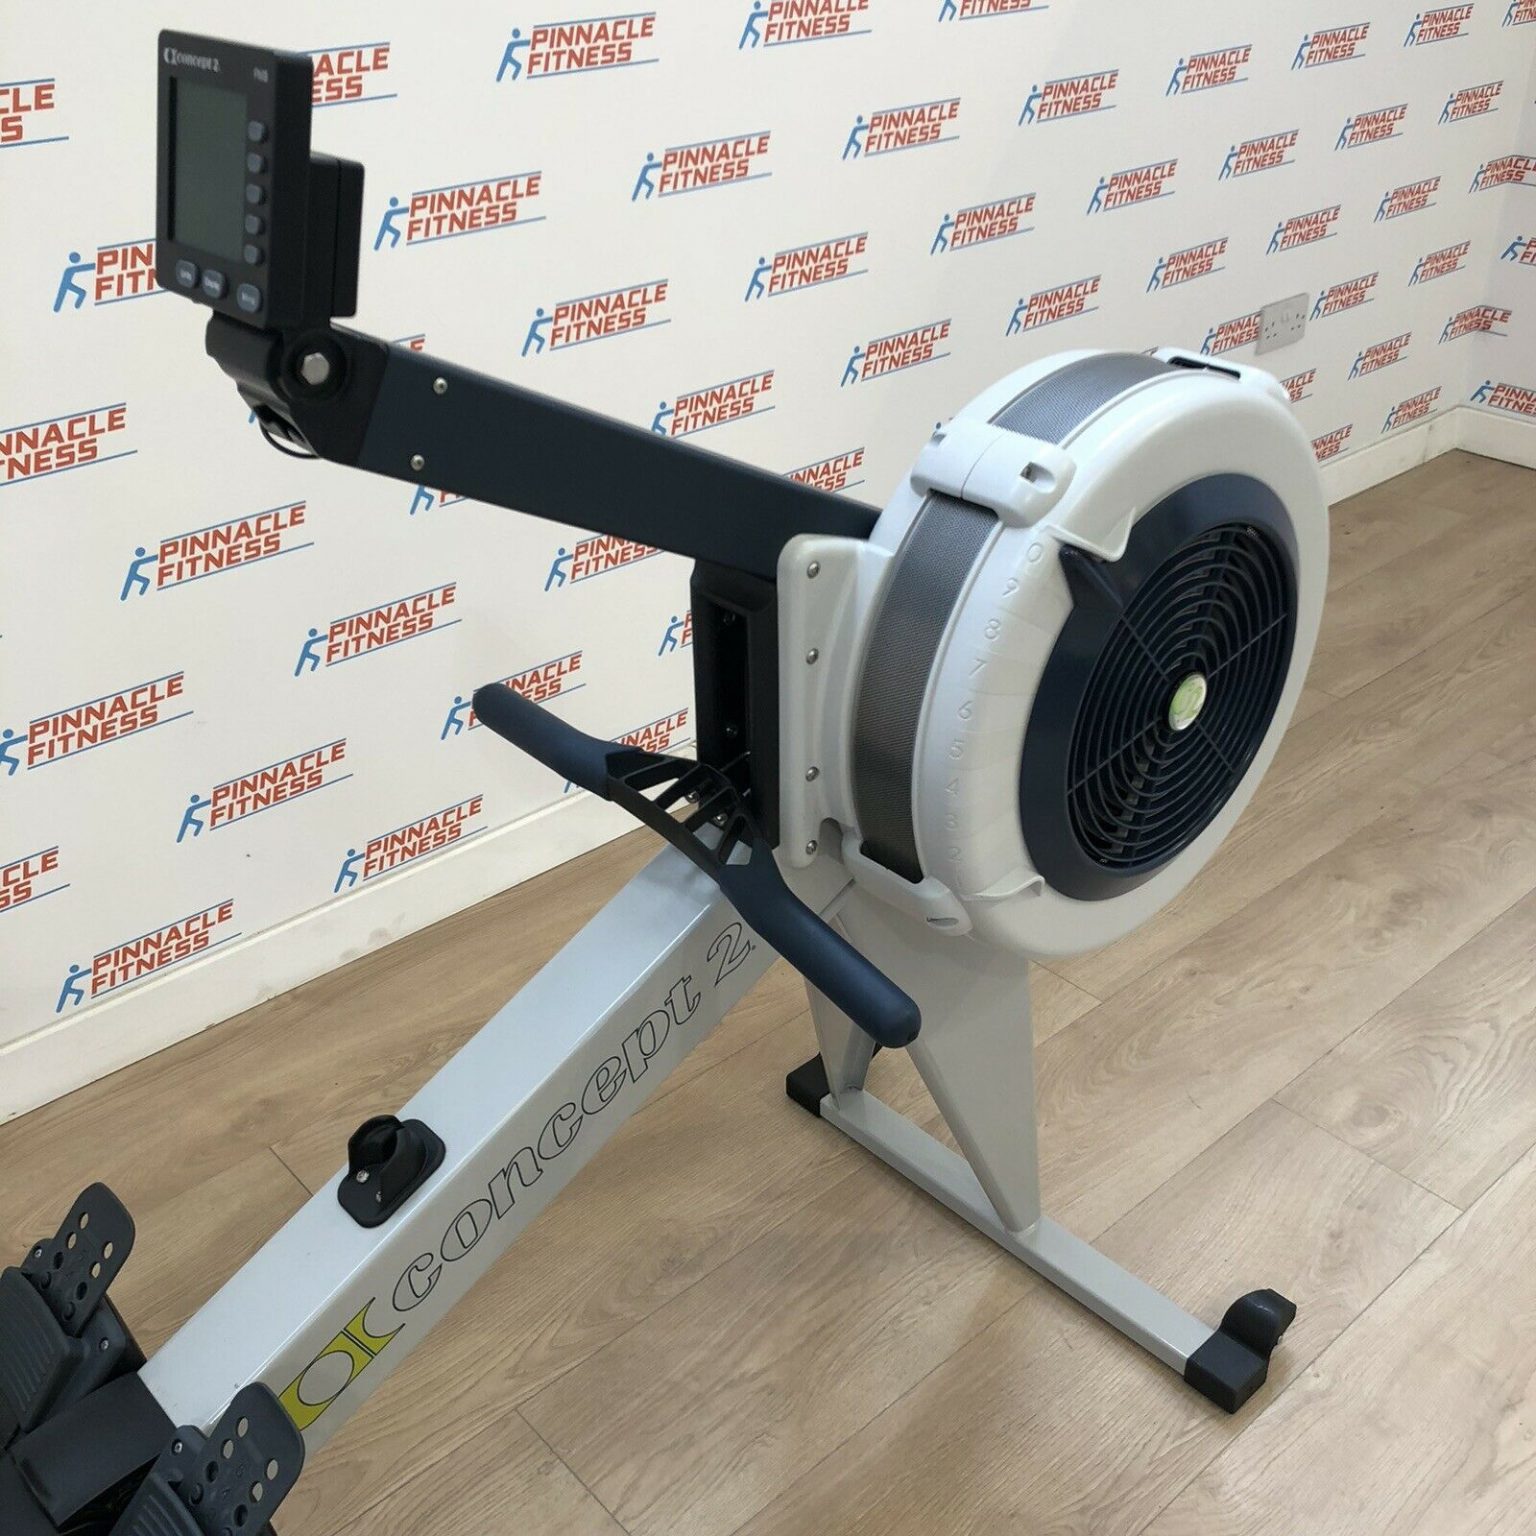 Concept 2 Model E Rowing Machine With PM5 Console Refurbished 184397637341 2 1536x1536 